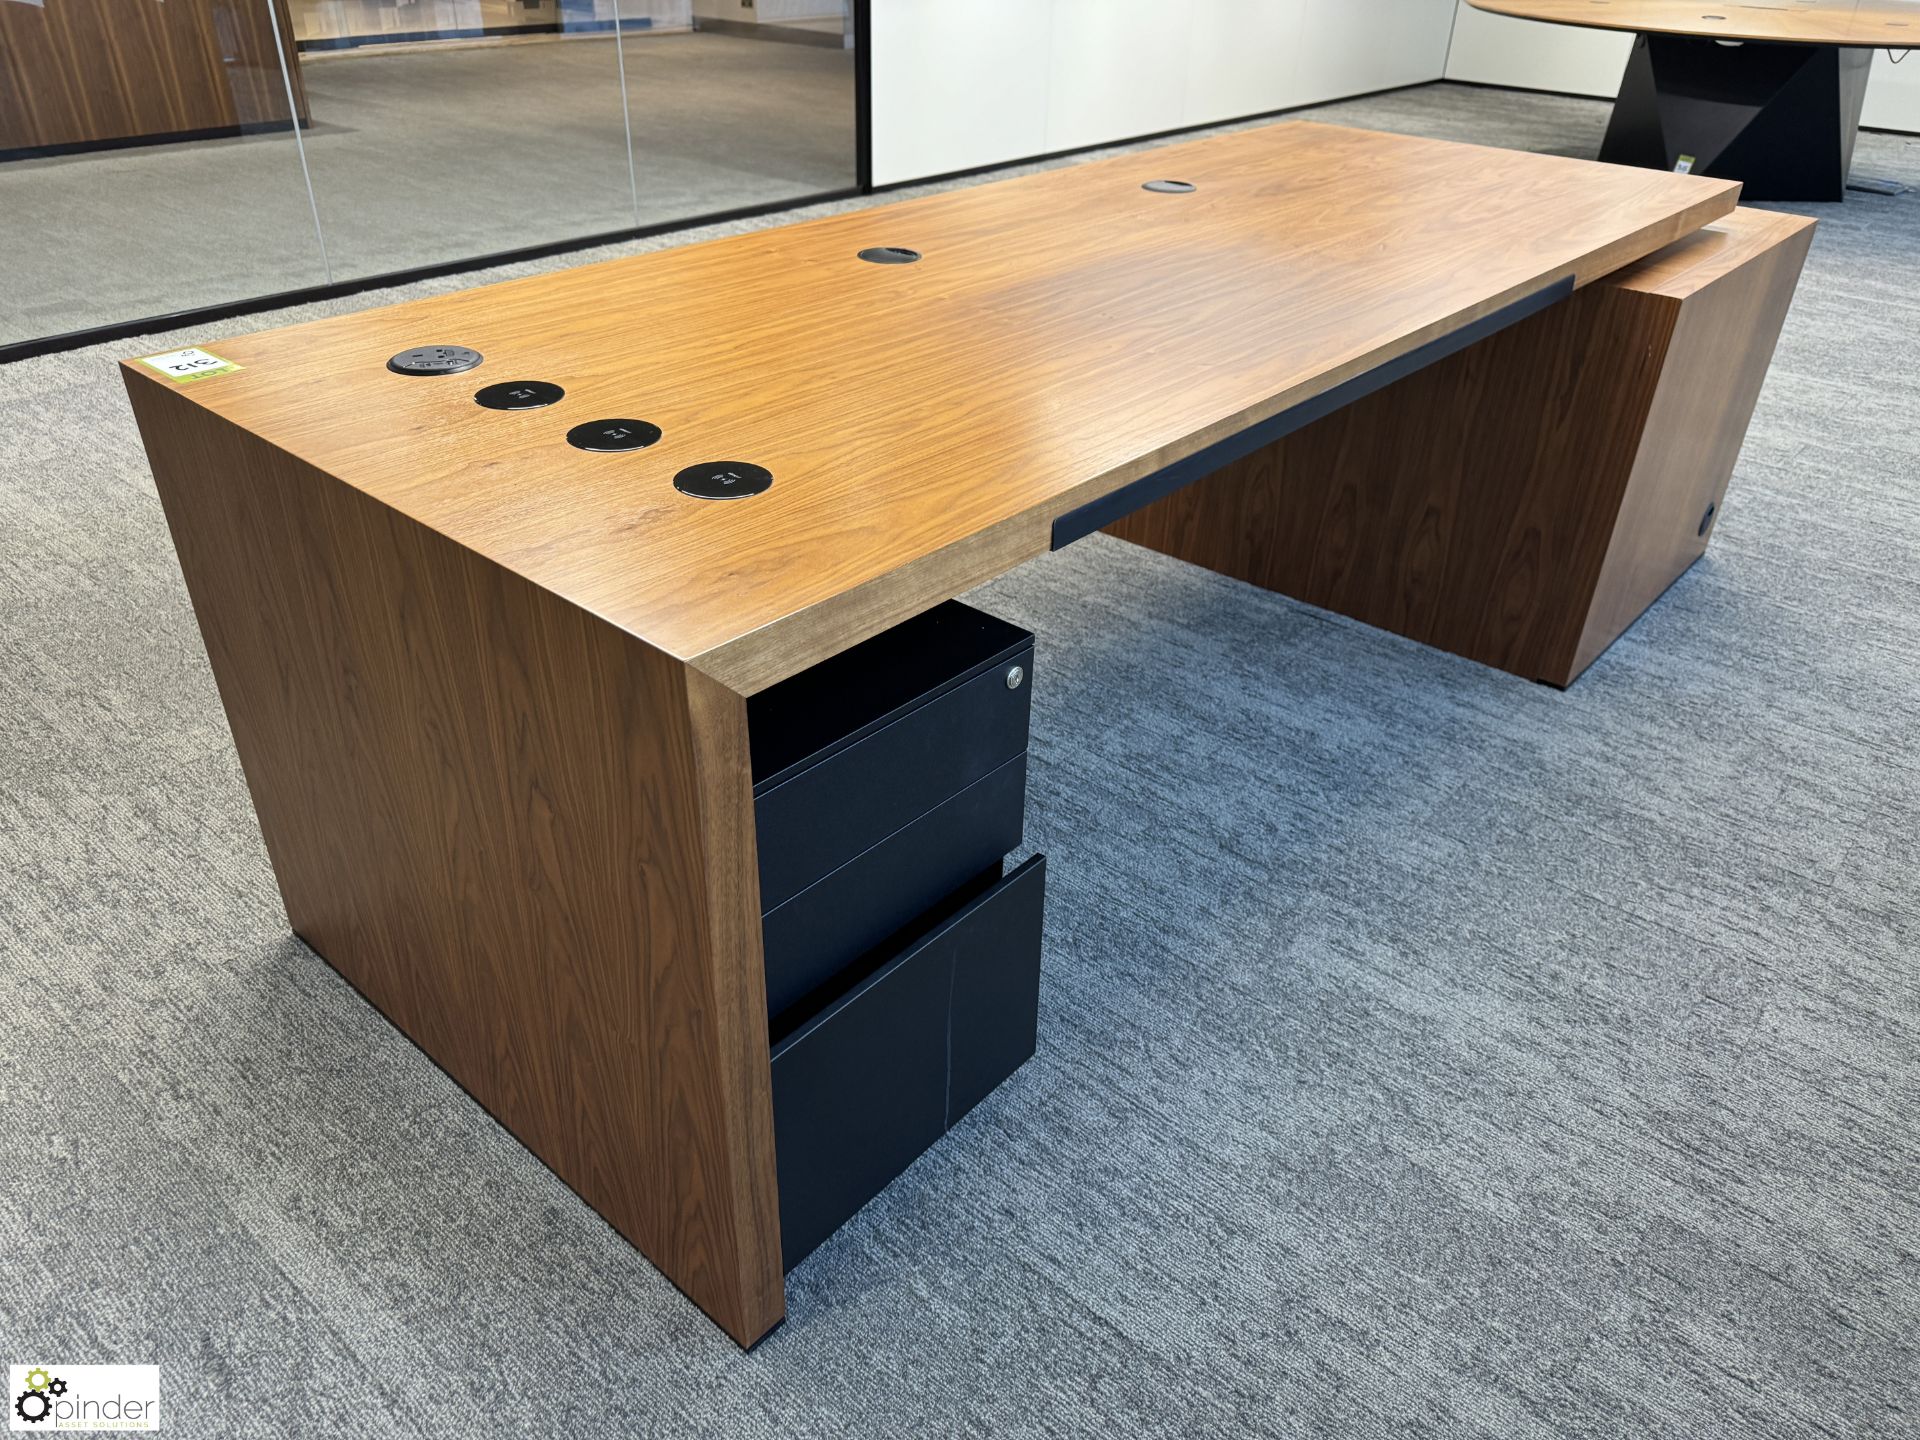 Cherry veneer Executive Desk, 2400mm x 900mm x 760mm, with 3 air charges, plug socket, bookcase - Image 4 of 6